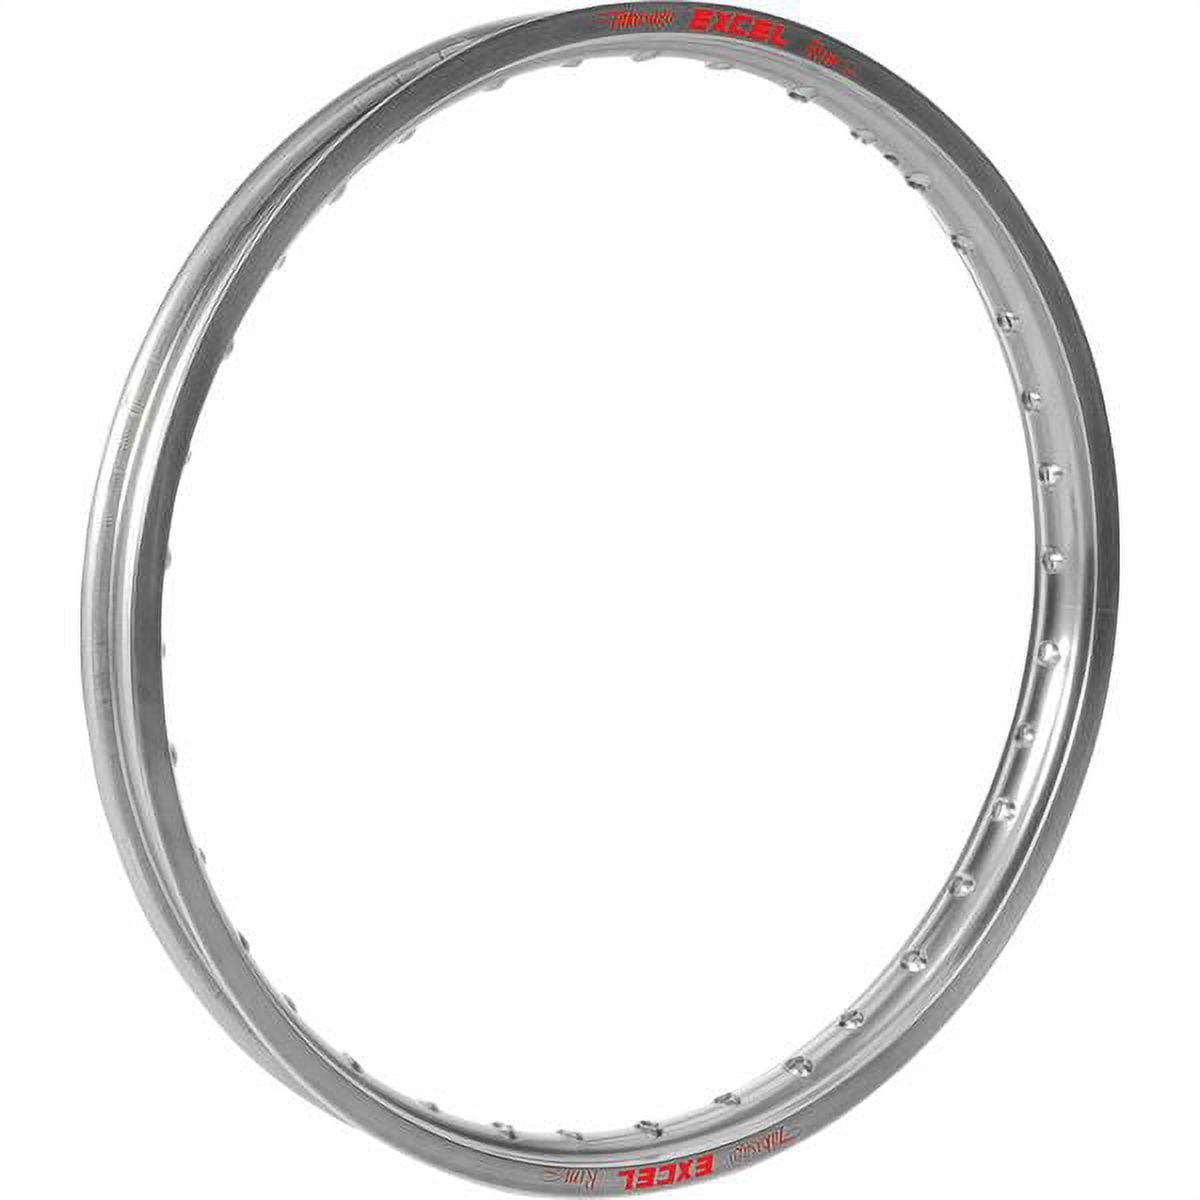 Silver 17 x 1.40 Excel Takasago 32 Hole Front Rim - EBS404